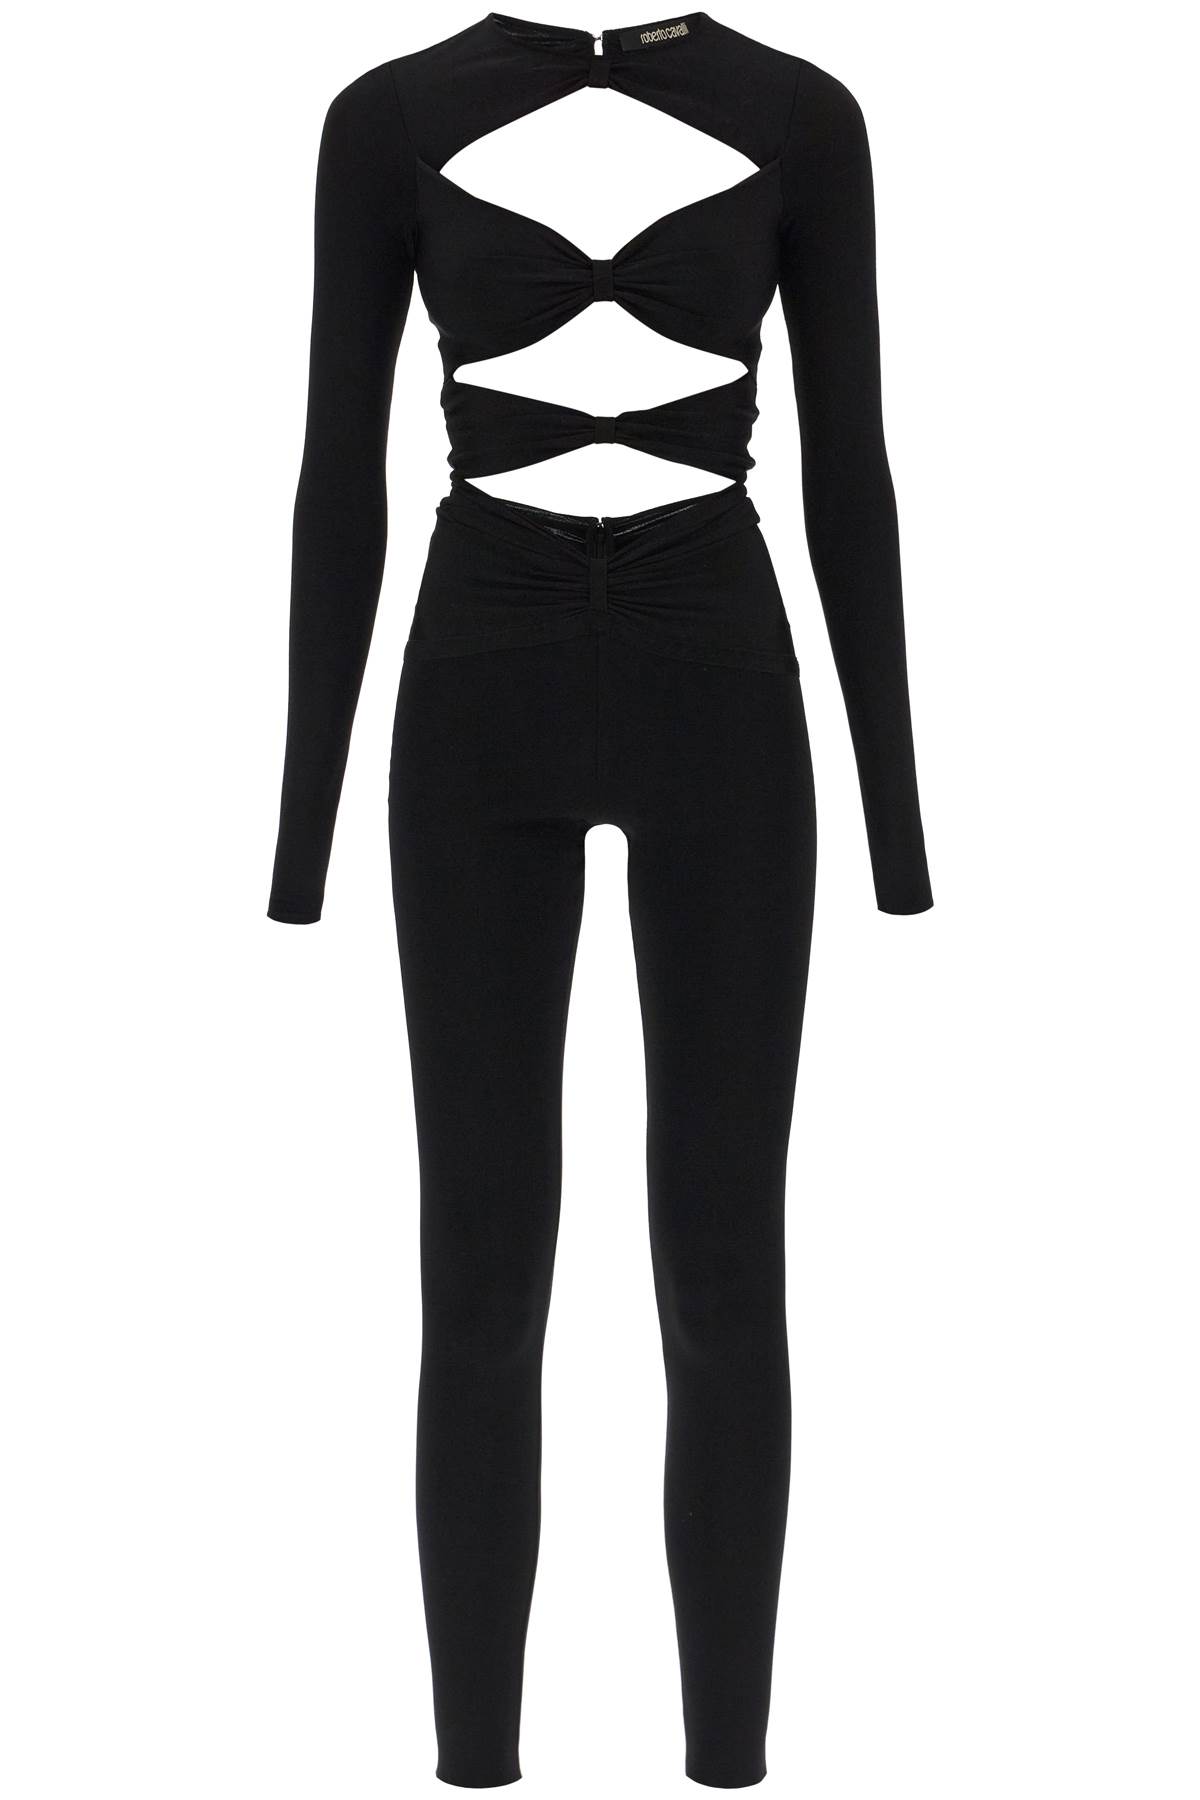 dressing gownRTO CAVALLI LONG-SLEEVED JUMPSUIT WITH CUT-OUTS